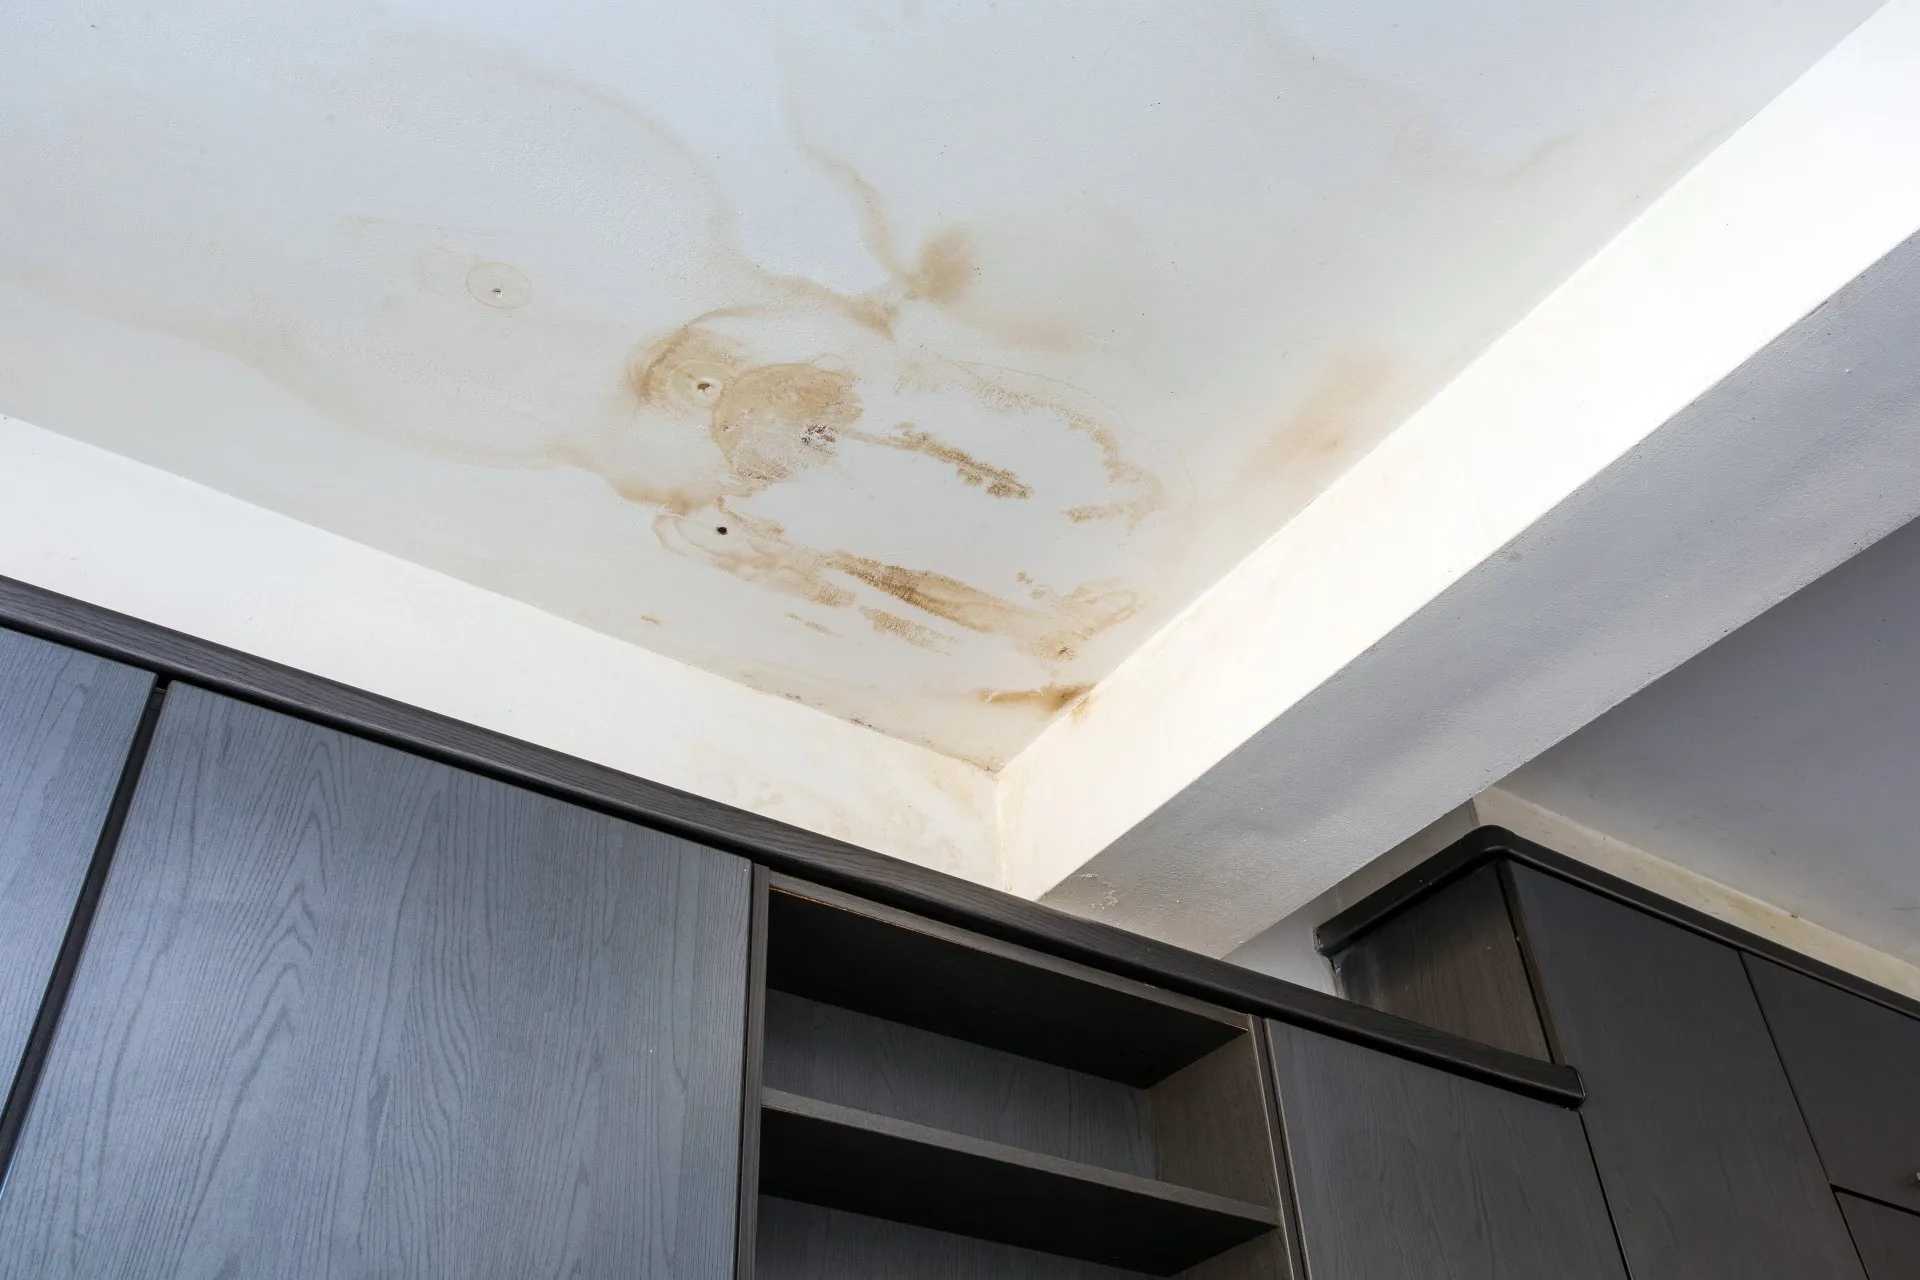 Ceiling and Walls Leak